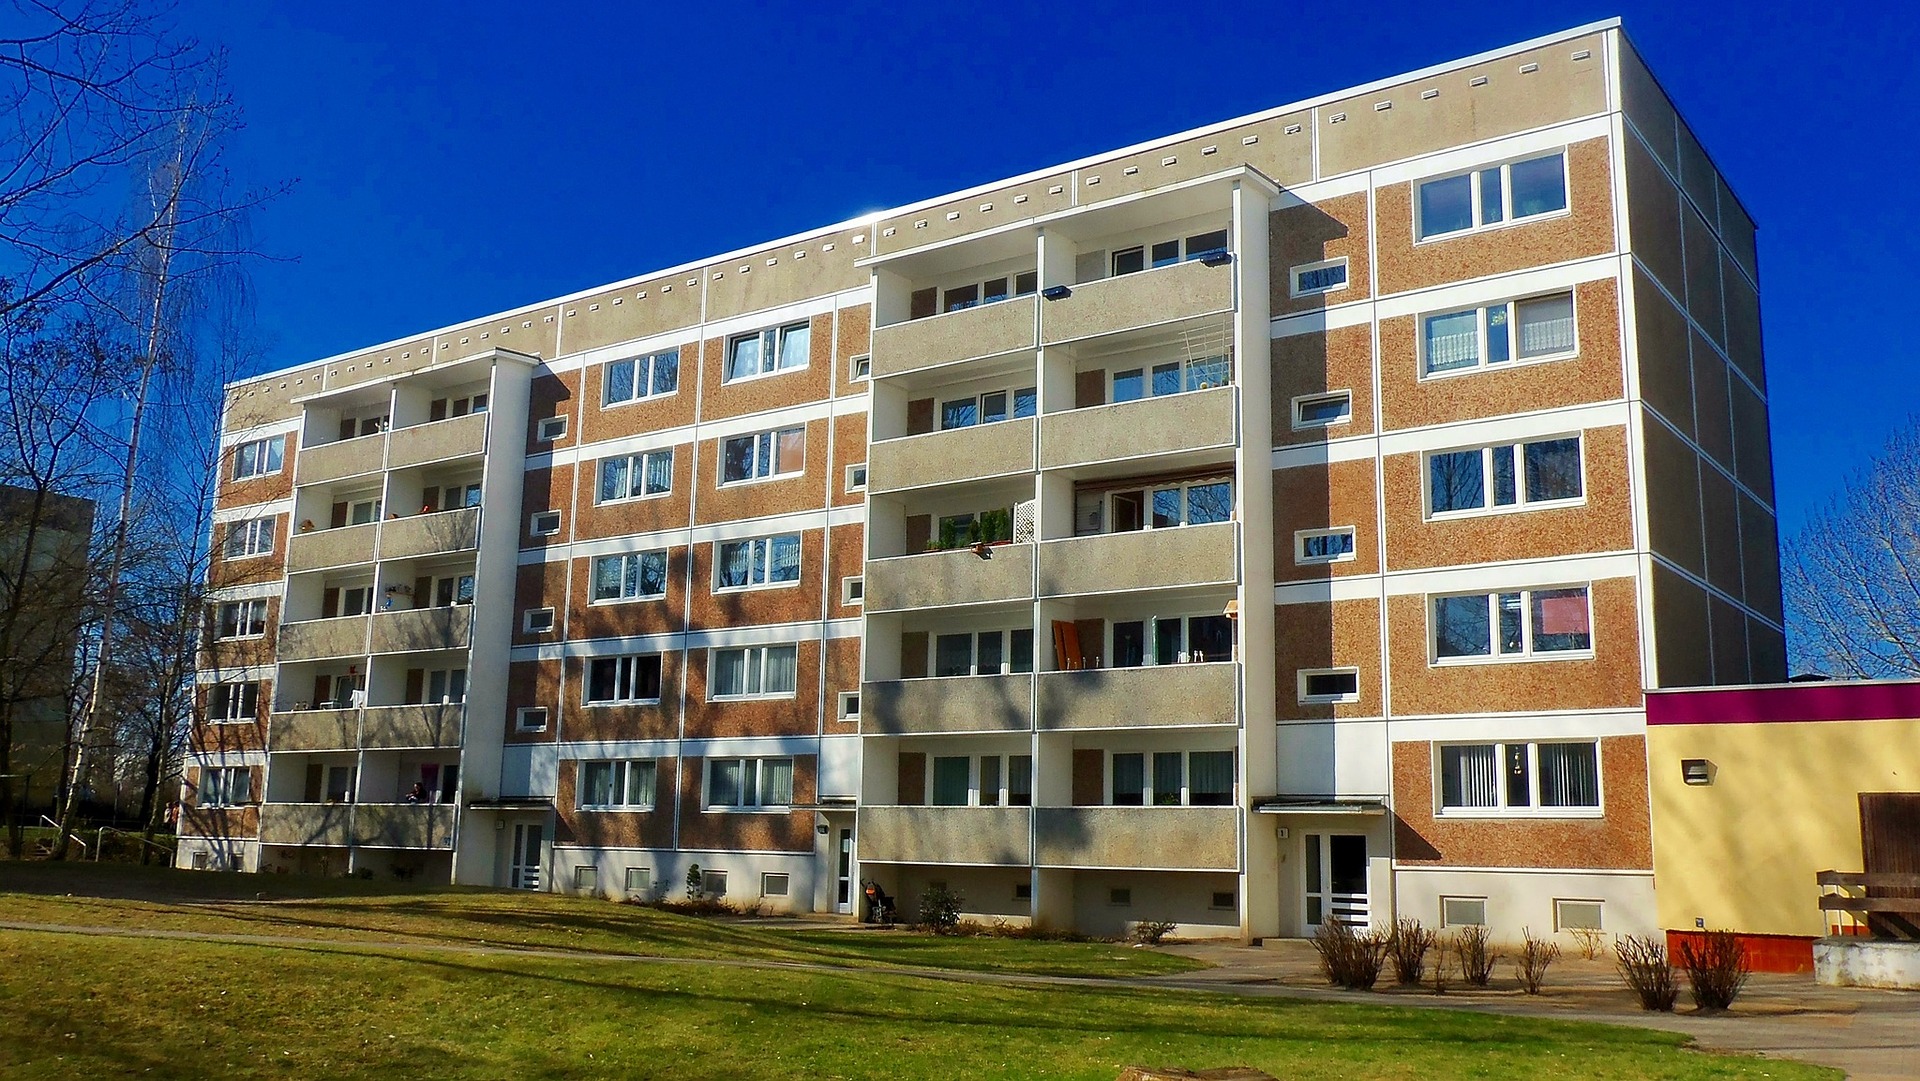 apartment building in an image with a blue sky